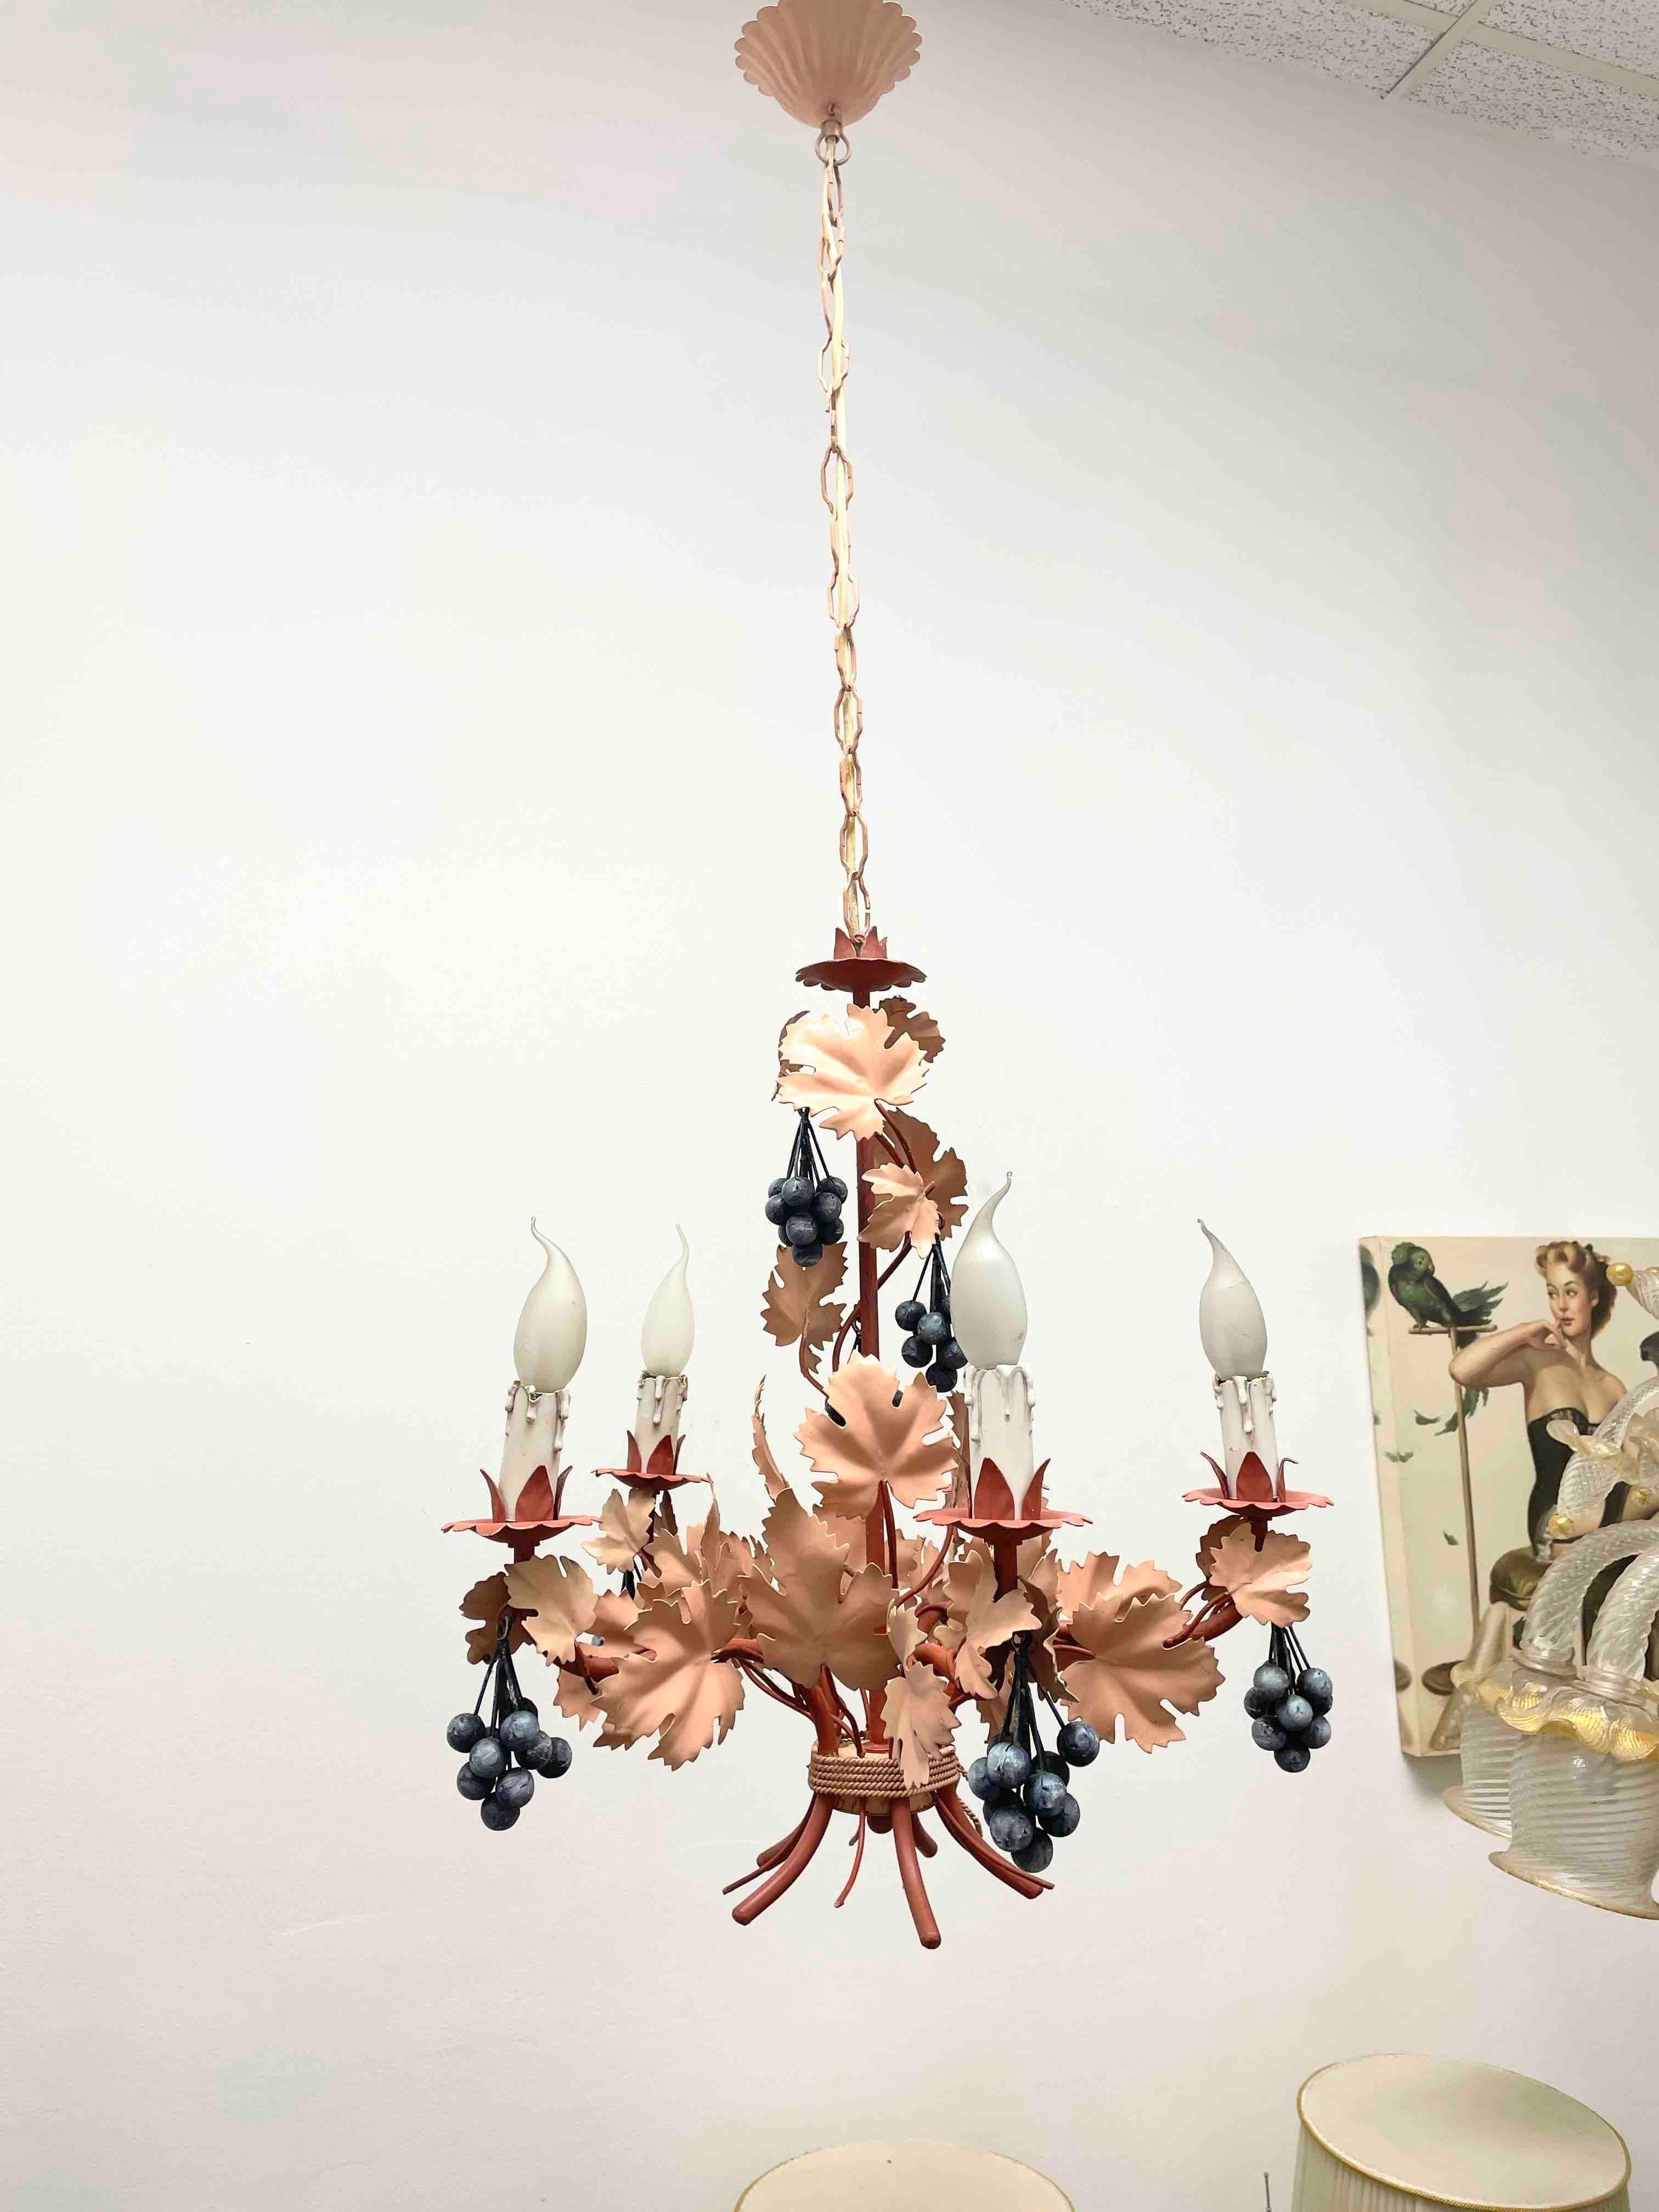 Petite Florentine style five-light chandelier. Functions as is with five E14 / 110 Volt light bulbs. Can take up to 40 Watts each bulb. Beautiful colored metal grasses and leaves chandelier. It gives a very warm light and represents the Italian